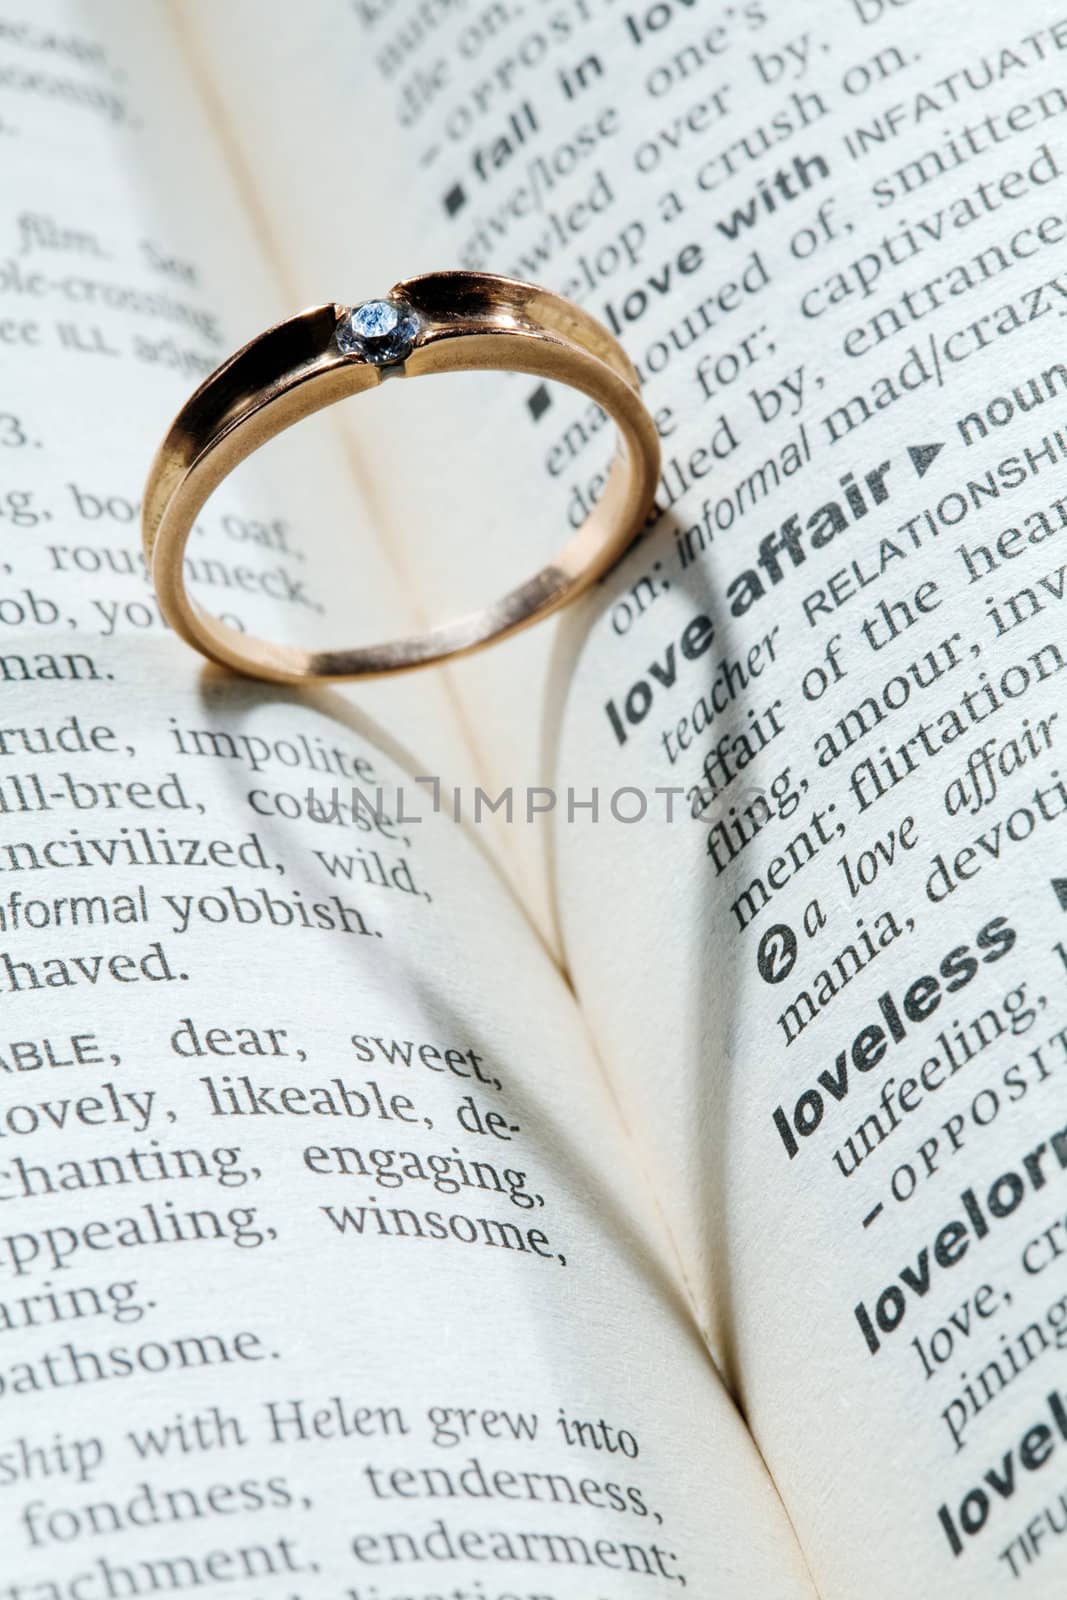 An image of a golden ring with shade in the form of heart